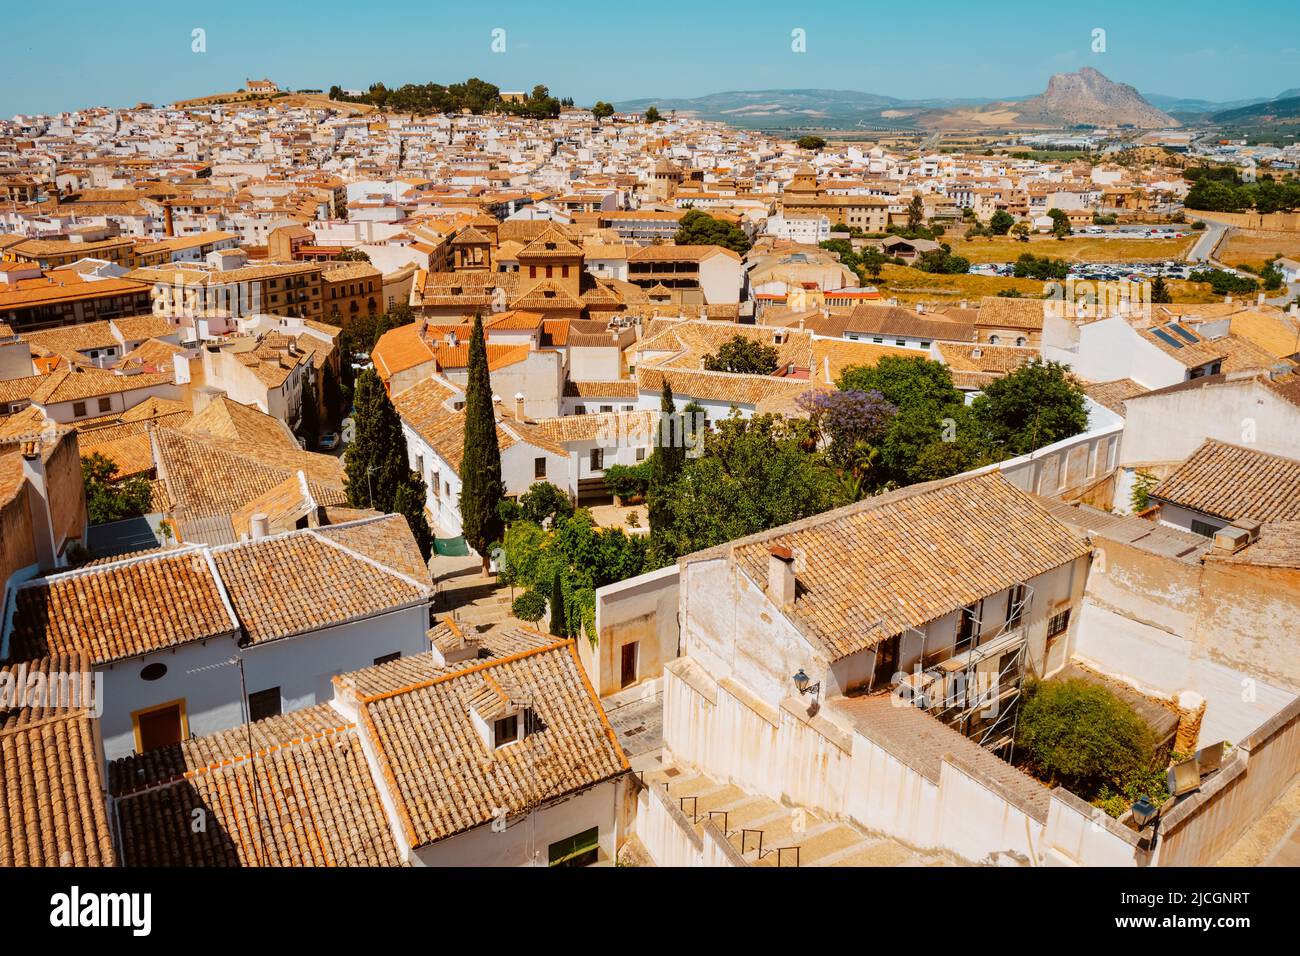 an aerial view of the old town of Antequera, in the province of Malaga, Spain Stock Photo